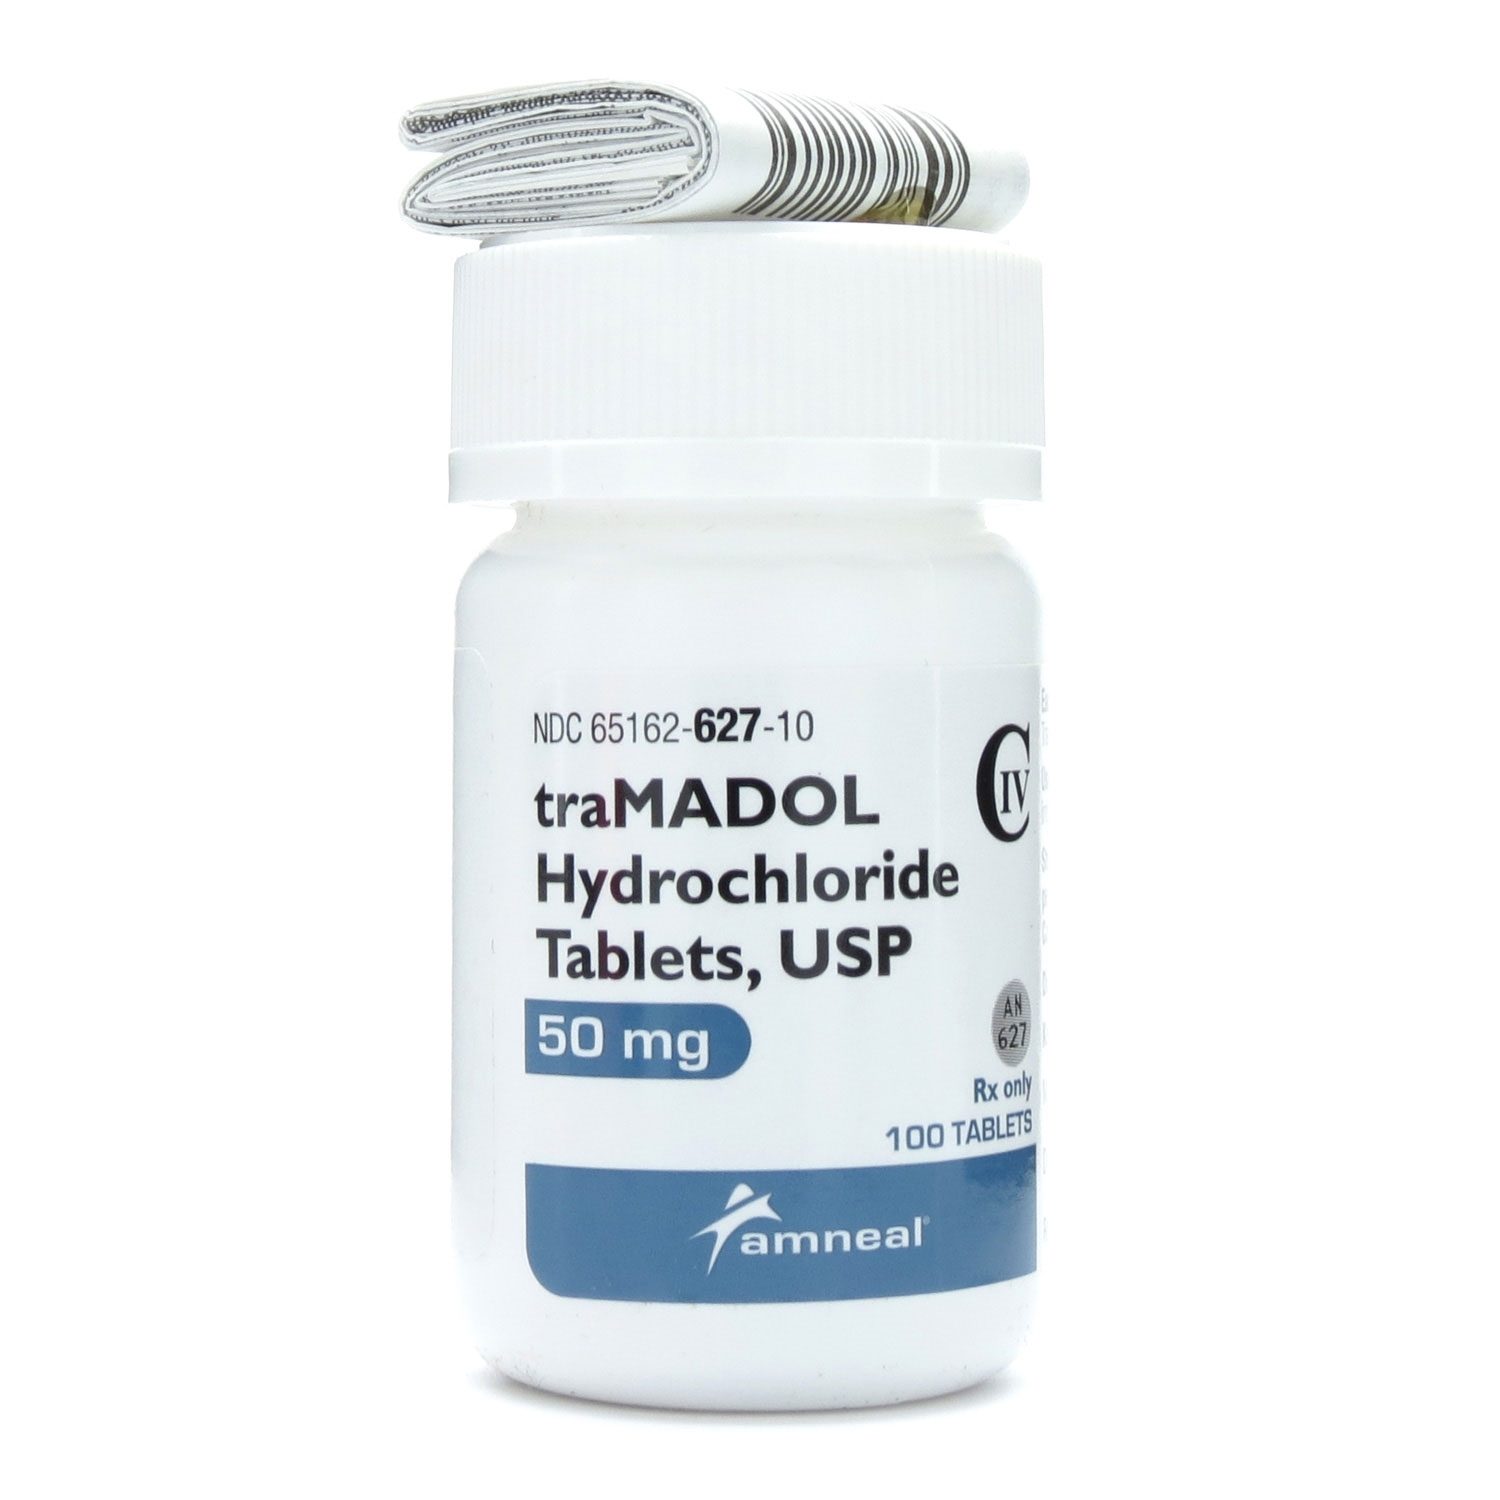 tramadol hcl 50 mg and alcohol